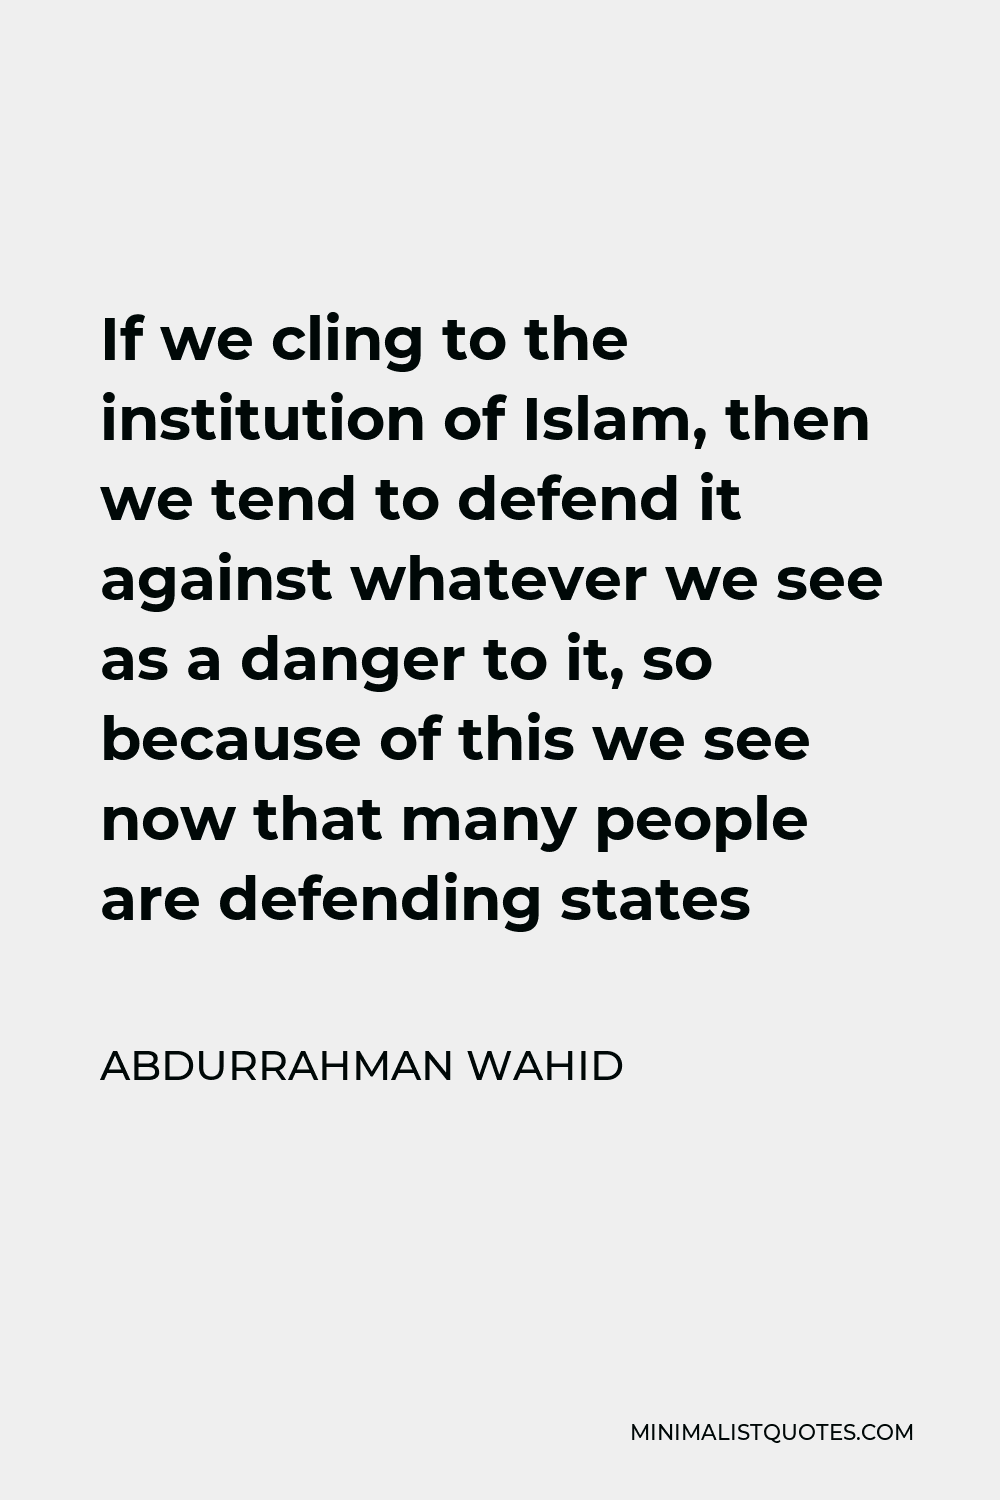 Abdurrahman Wahid Quote - If we cling to the institution of Islam, then we tend to defend it against whatever we see as a danger to it, so because of this we see now that many people are defending states